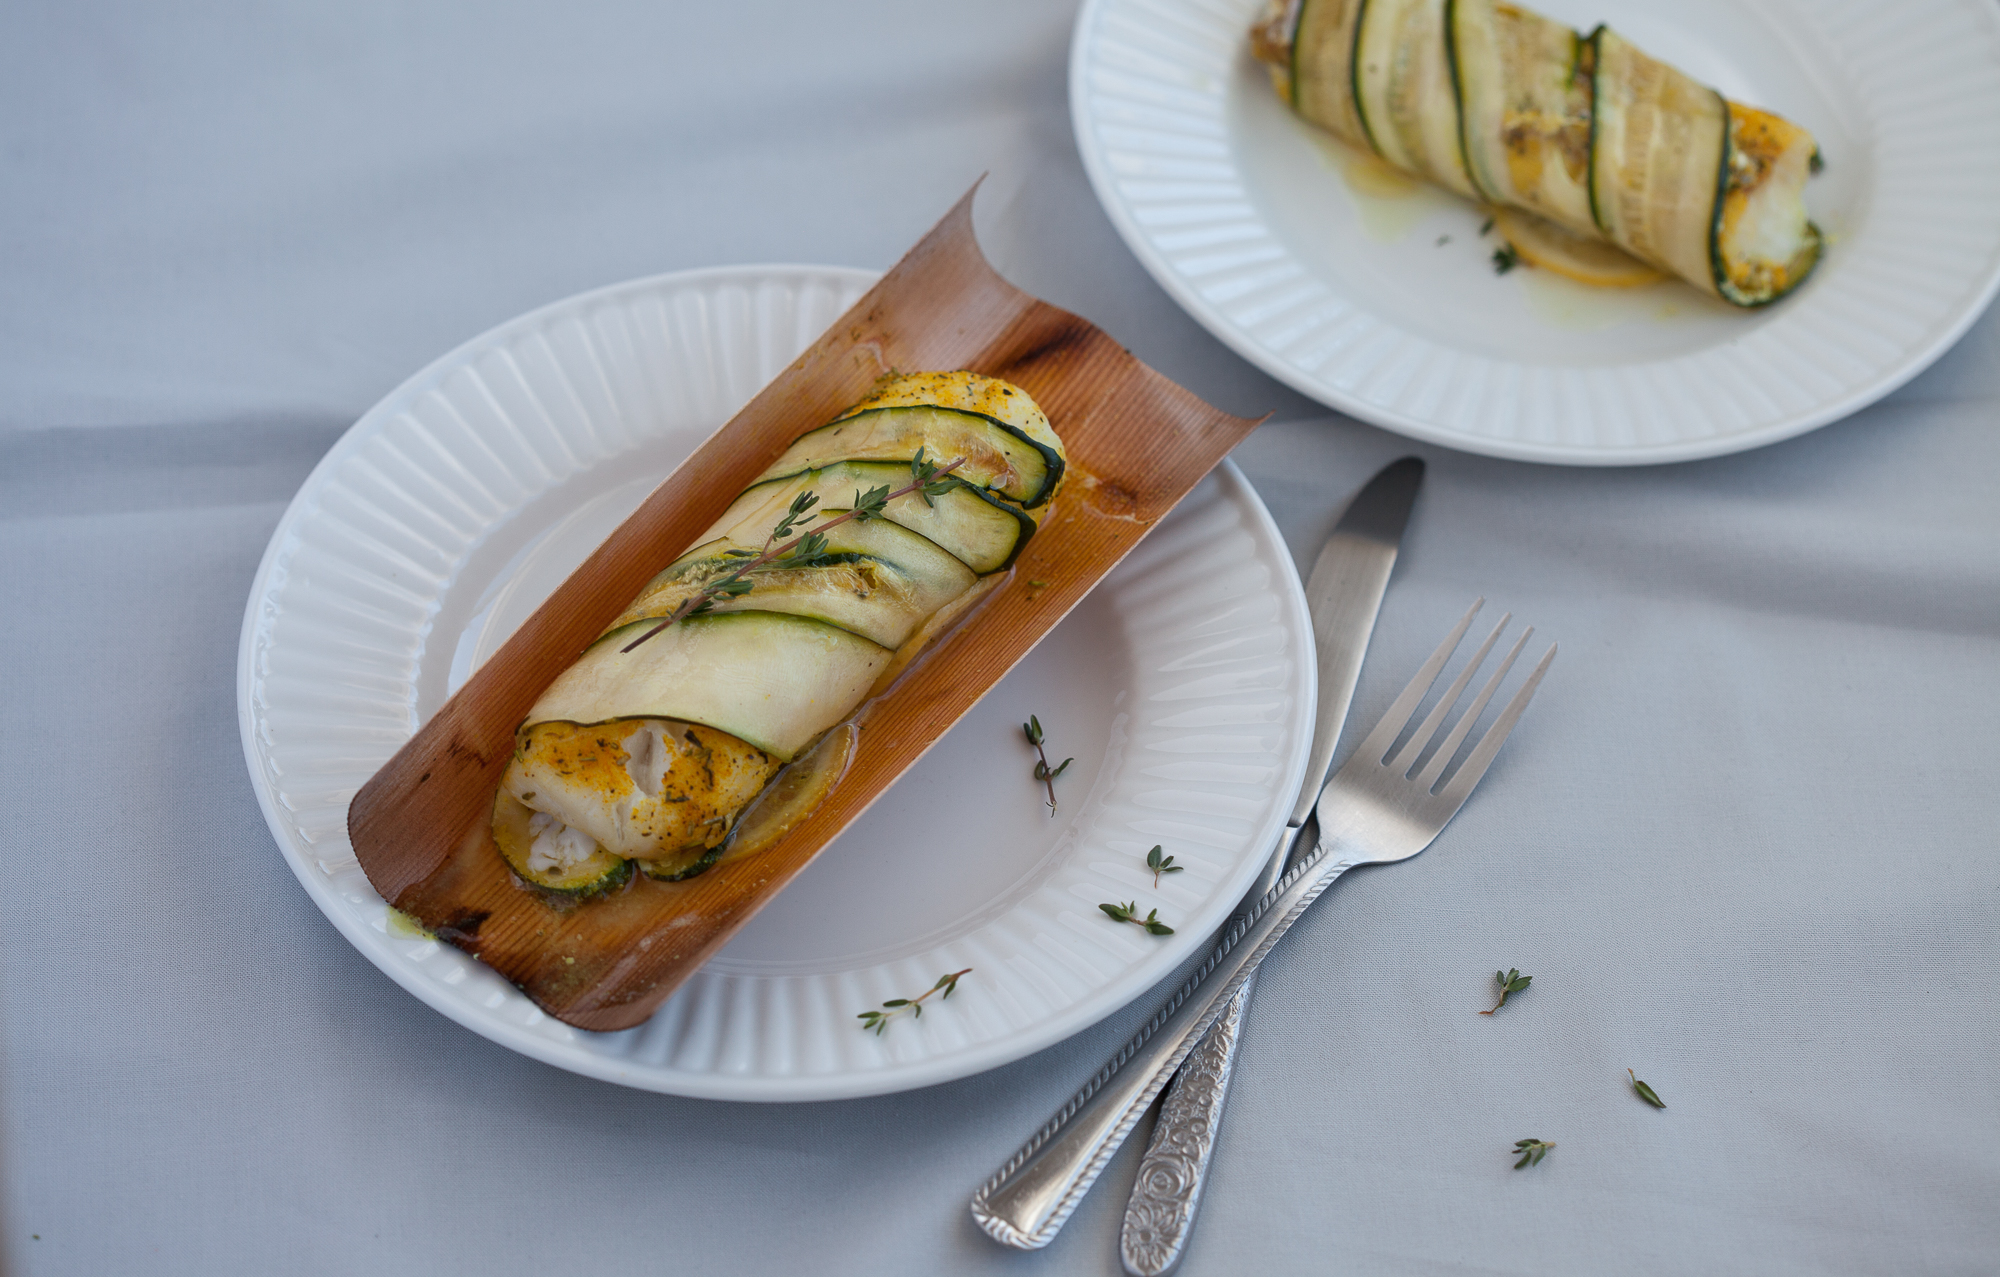 Cedar and Zucchini Wrapped Cod Loin with Turmeric and Lemon